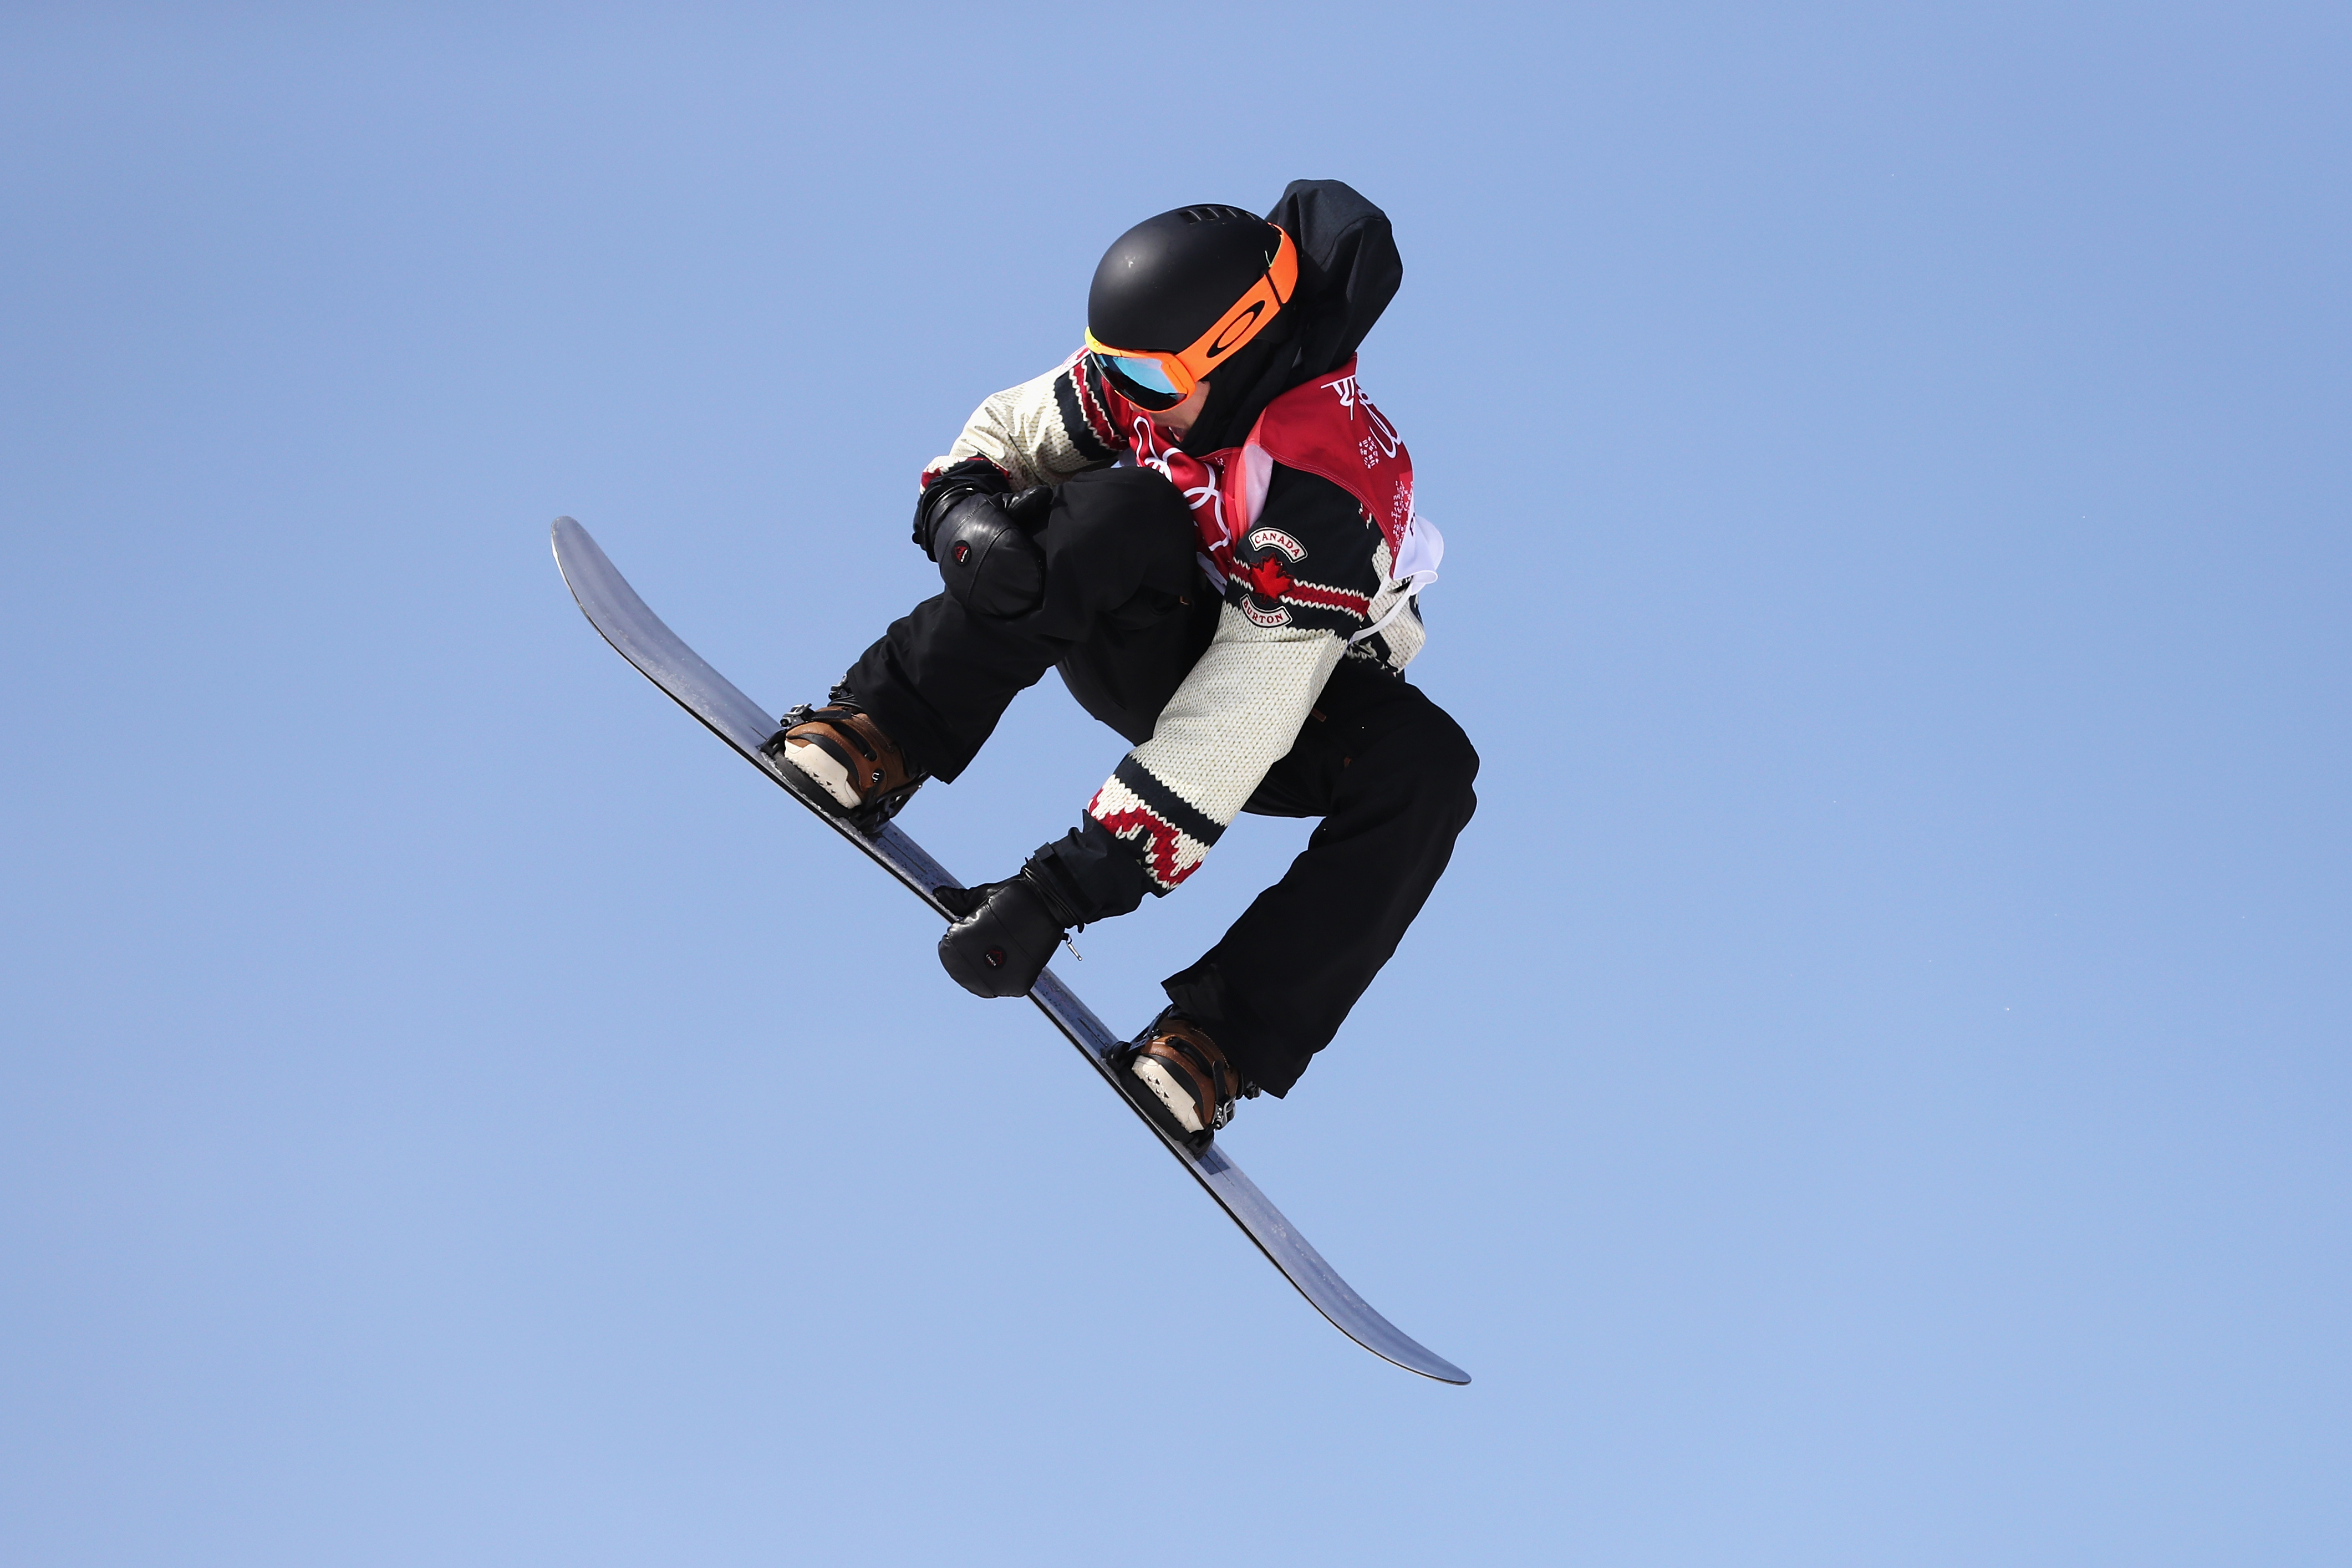 Mark McMorris of Canada competes during the Men's Big Air Qualification Heat 2 on day 12 of the PyeongChang 2018 Winter Olympic Games at Alpensia Ski Jumping Centre on February 21, 2018 in Pyeongchang-gun, South Korea. (Lars Baron—Getty Images)